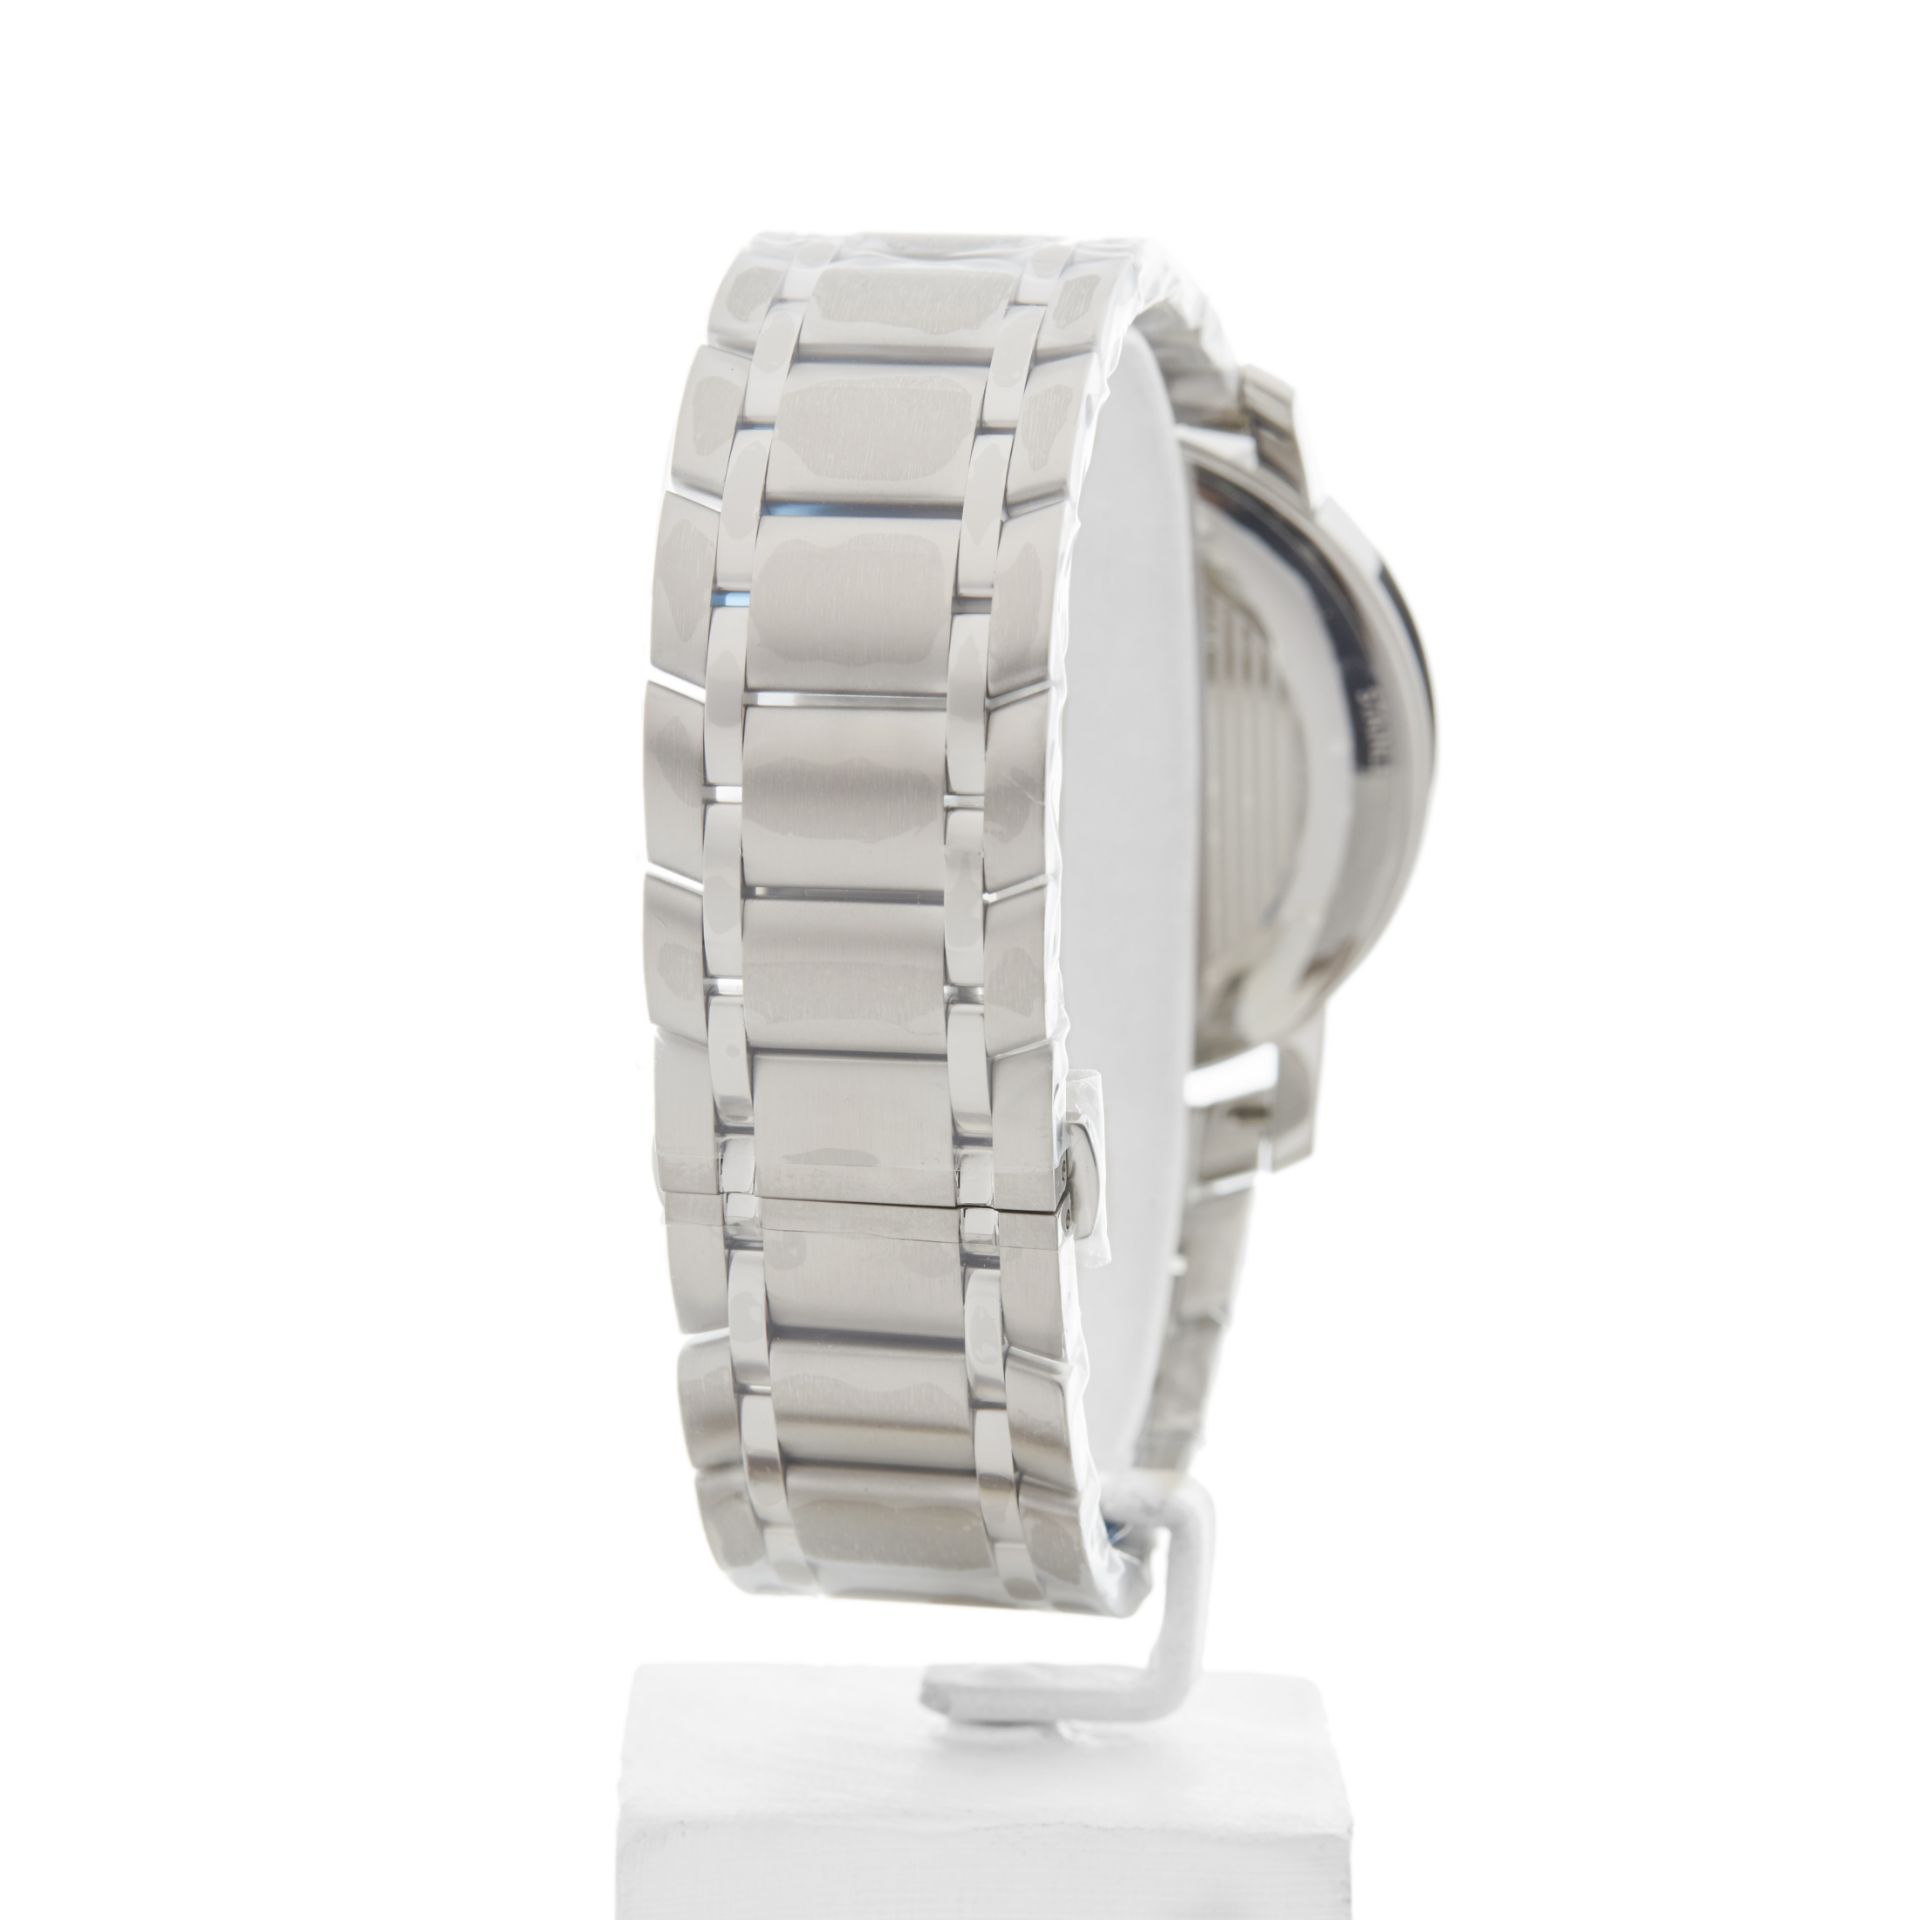 Baume & Mercier, Classima 42mm Stainless Steel M0A08833 - Image 7 of 8